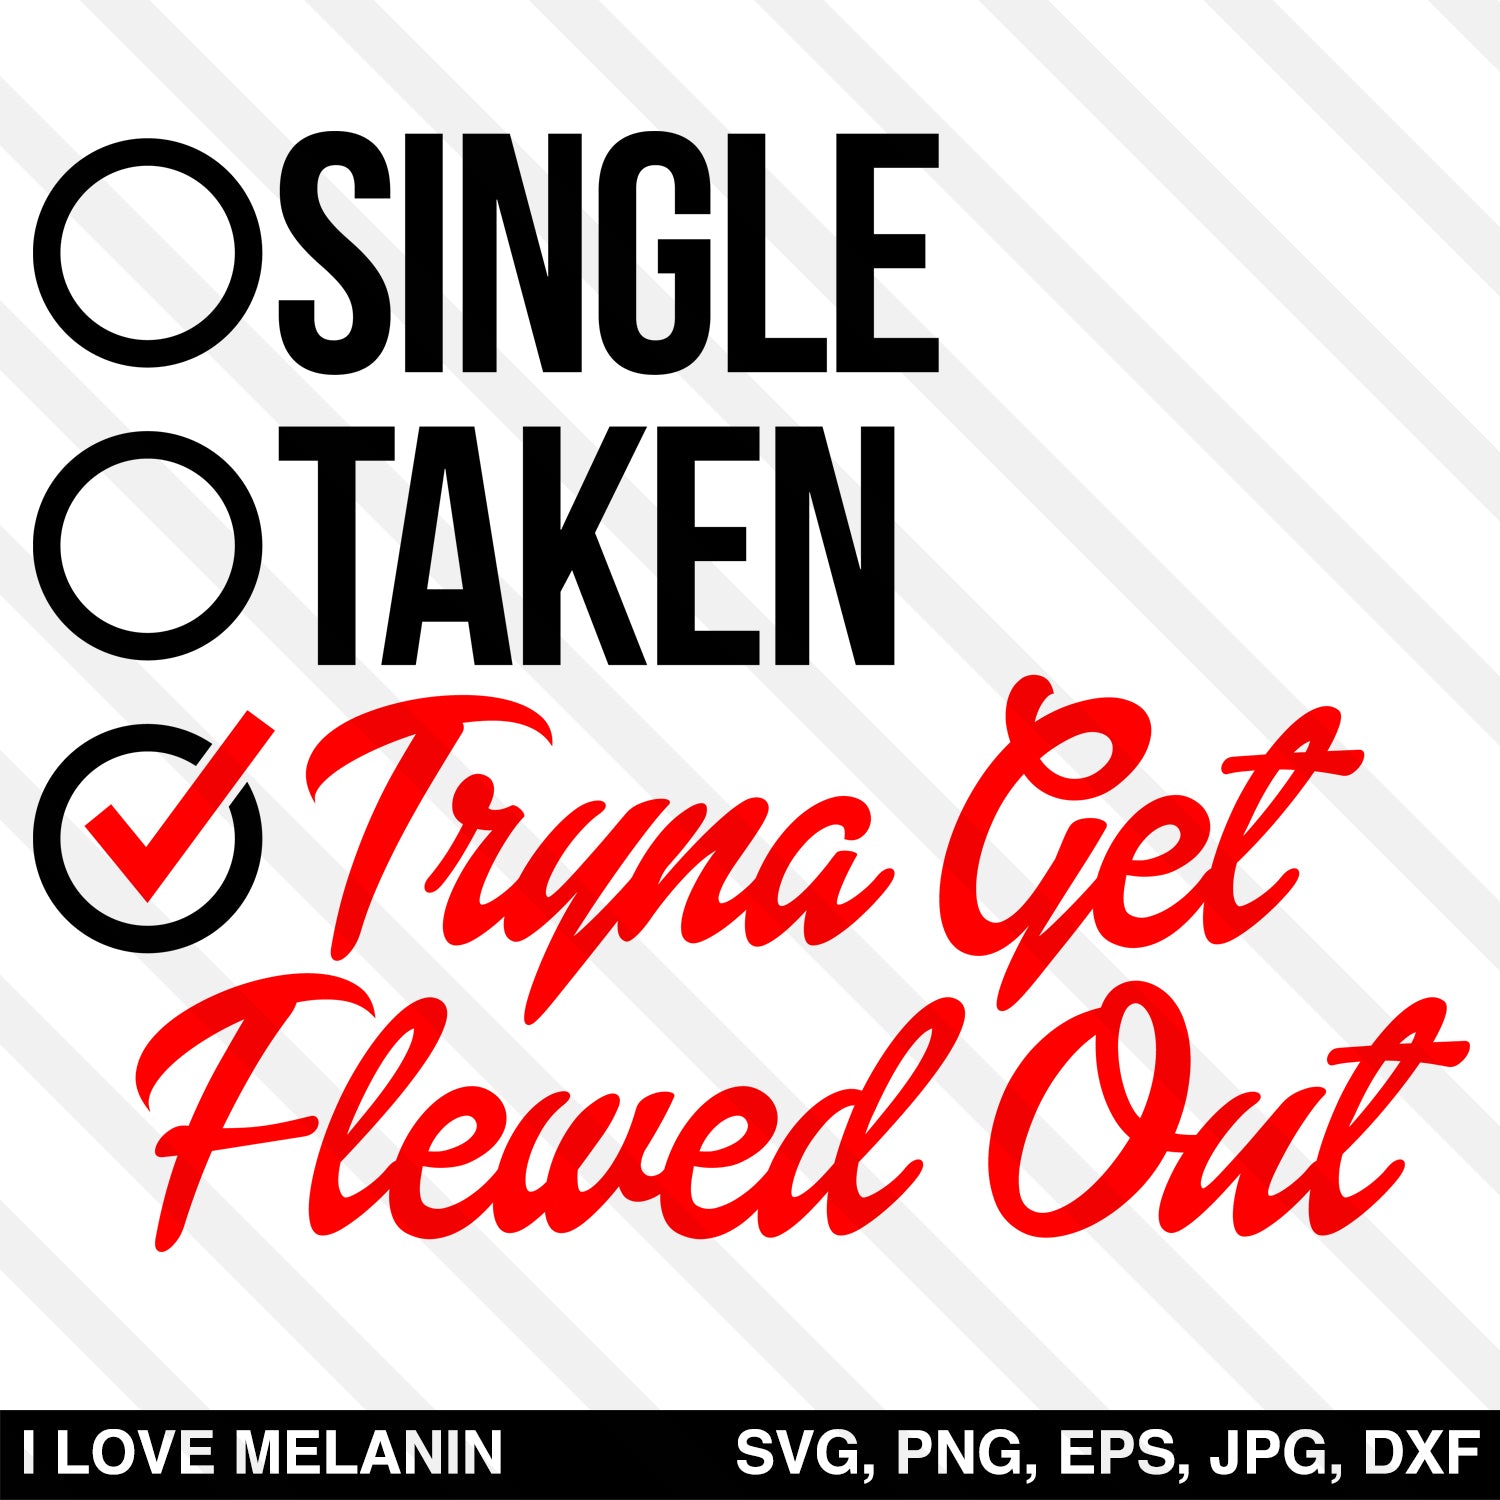 Single Taken Tryna Get Flewed Out SVG